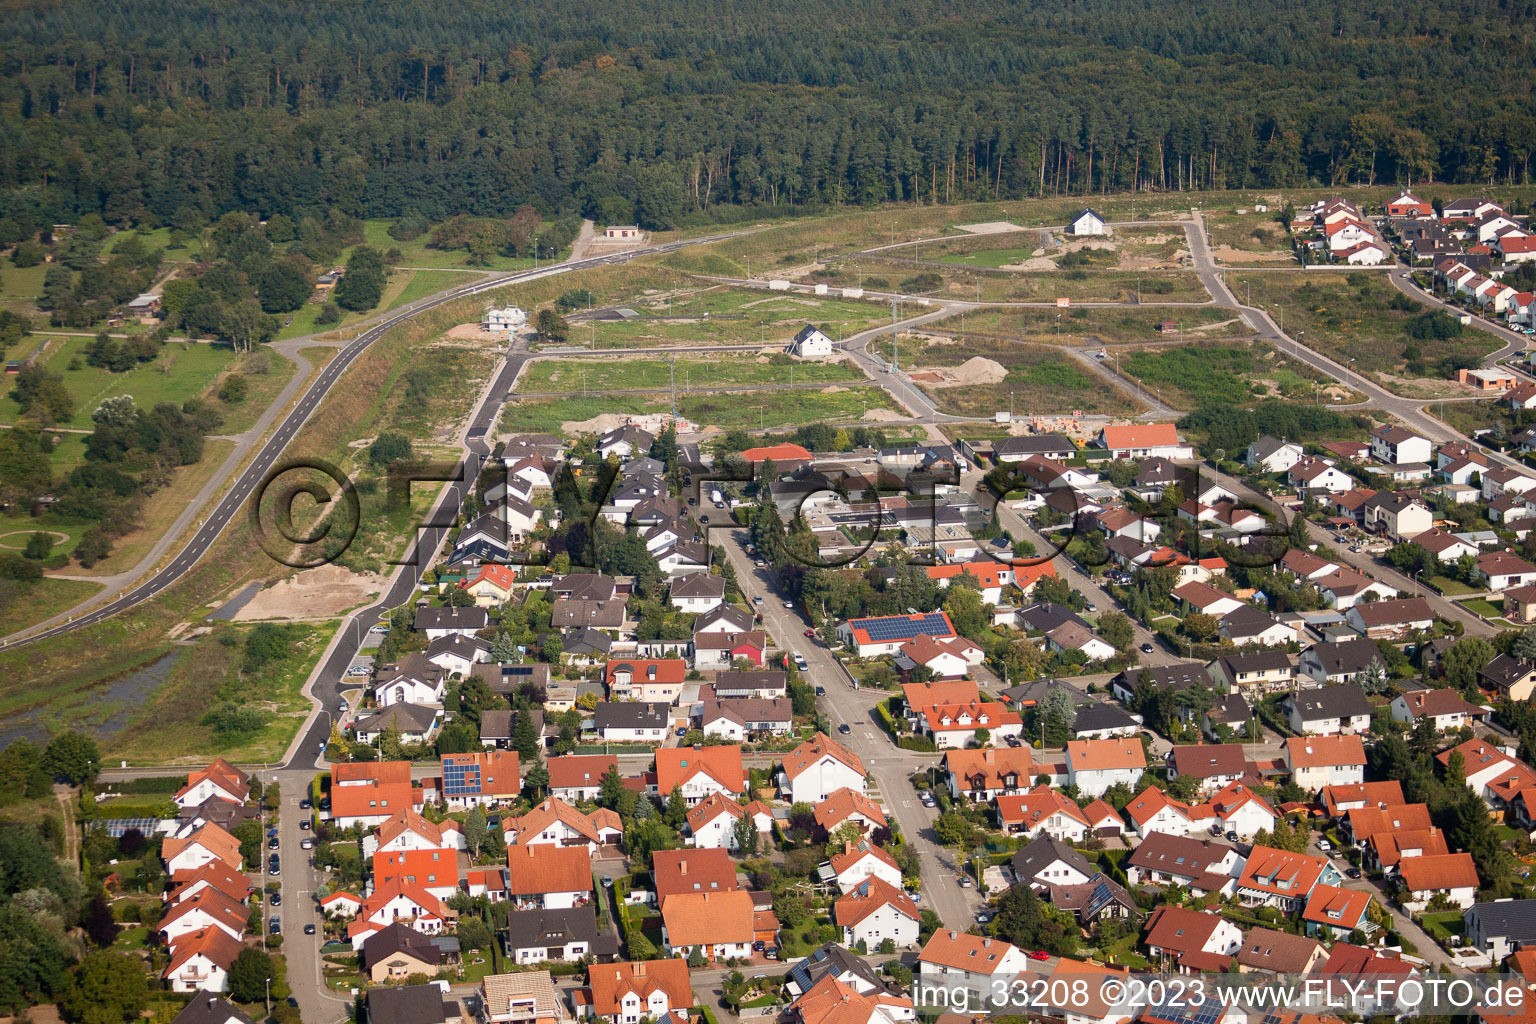 New development area SW in Jockgrim in the state Rhineland-Palatinate, Germany seen from above